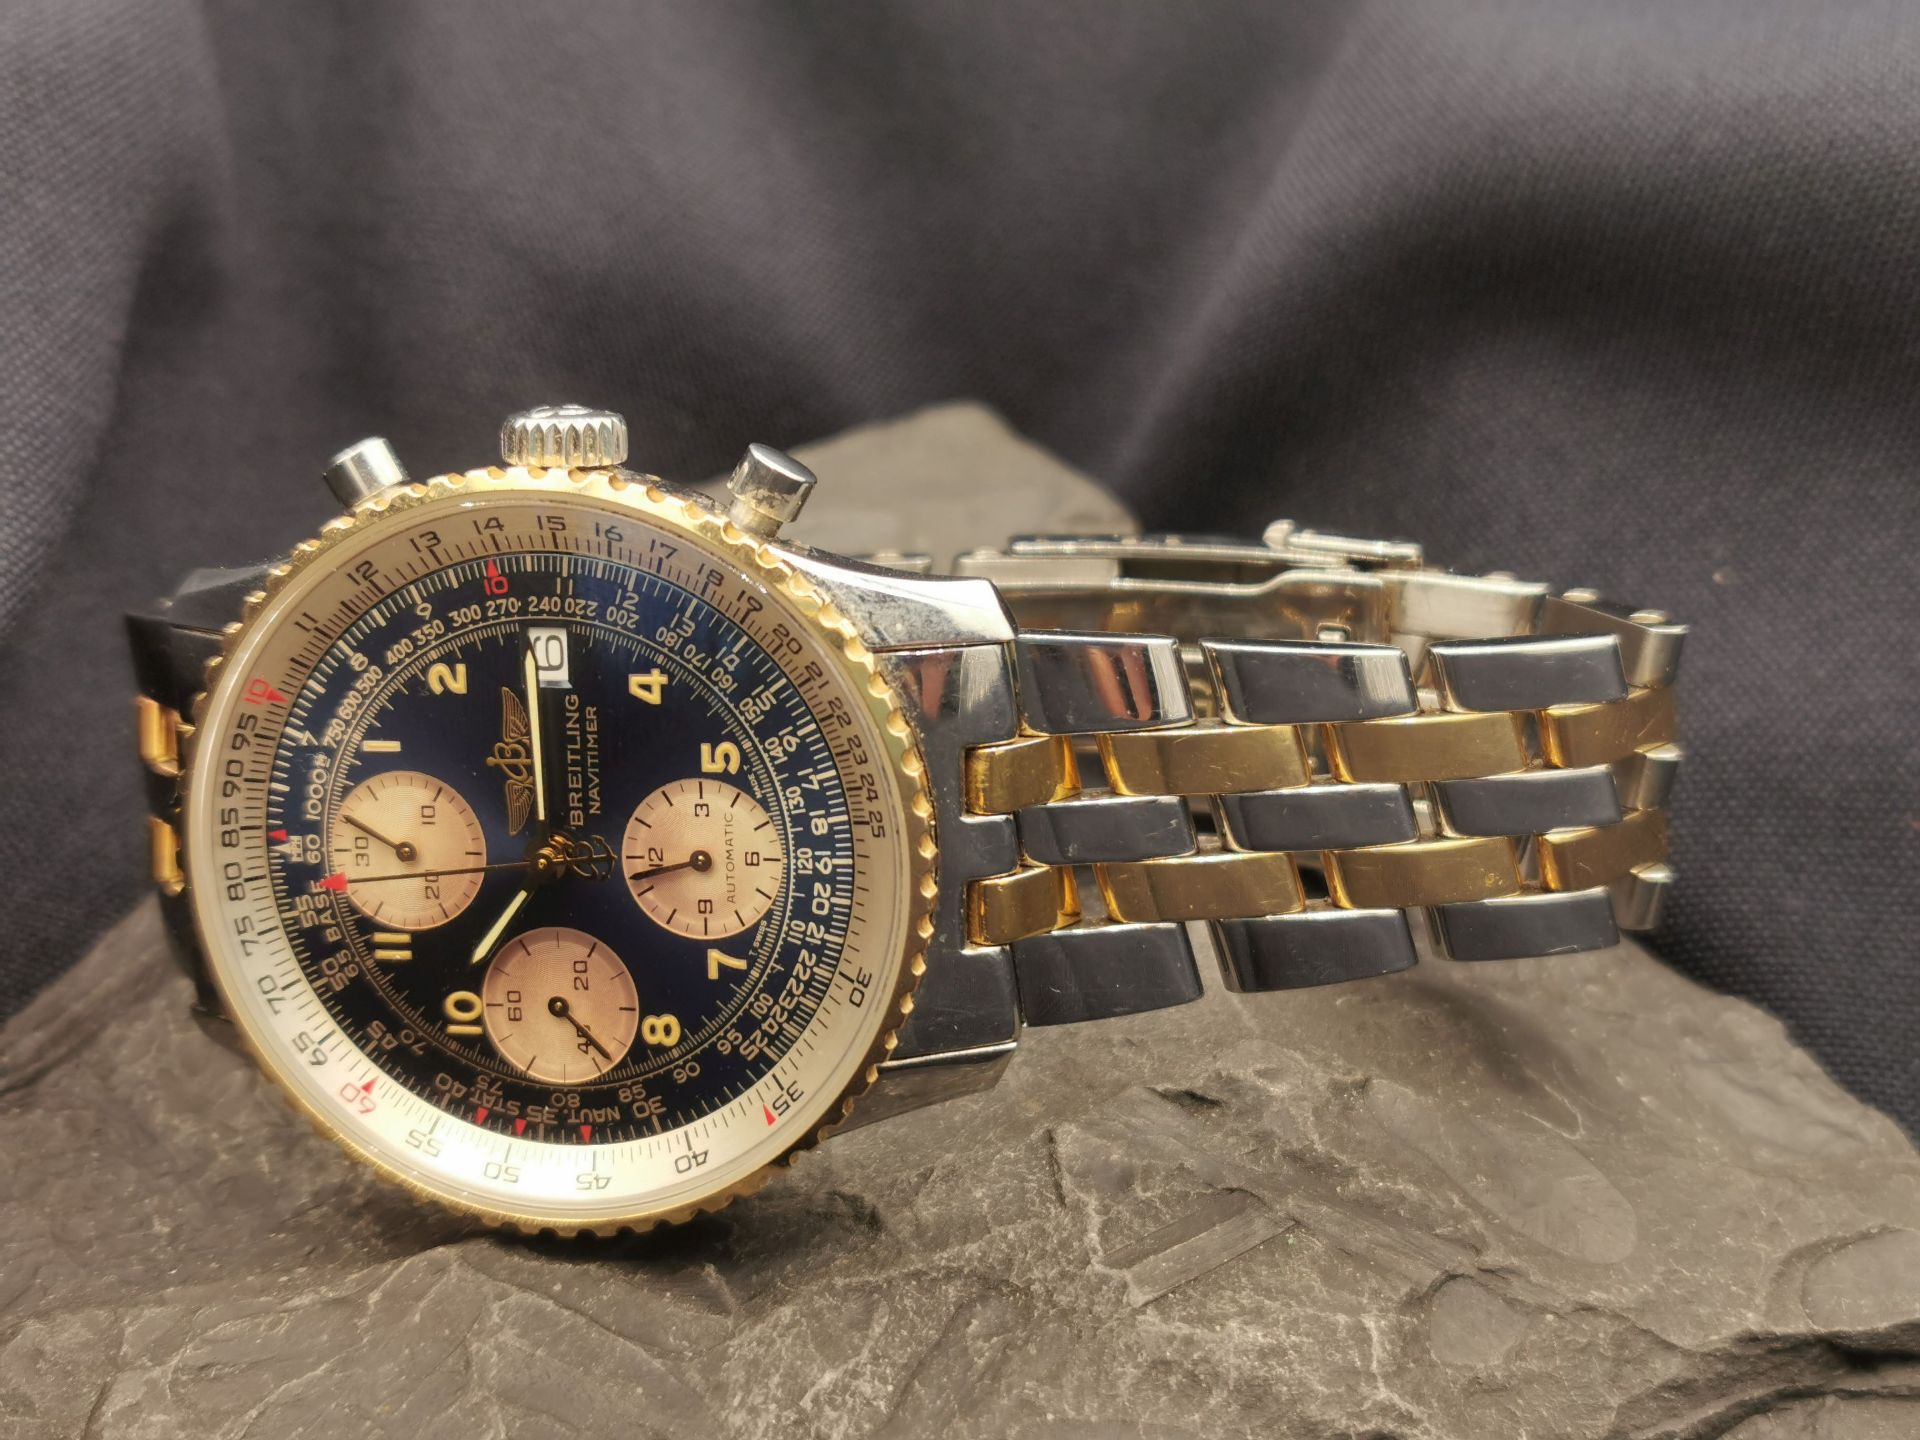 BREITLING NAVITIMER MALE WATCH - Image 5 of 13